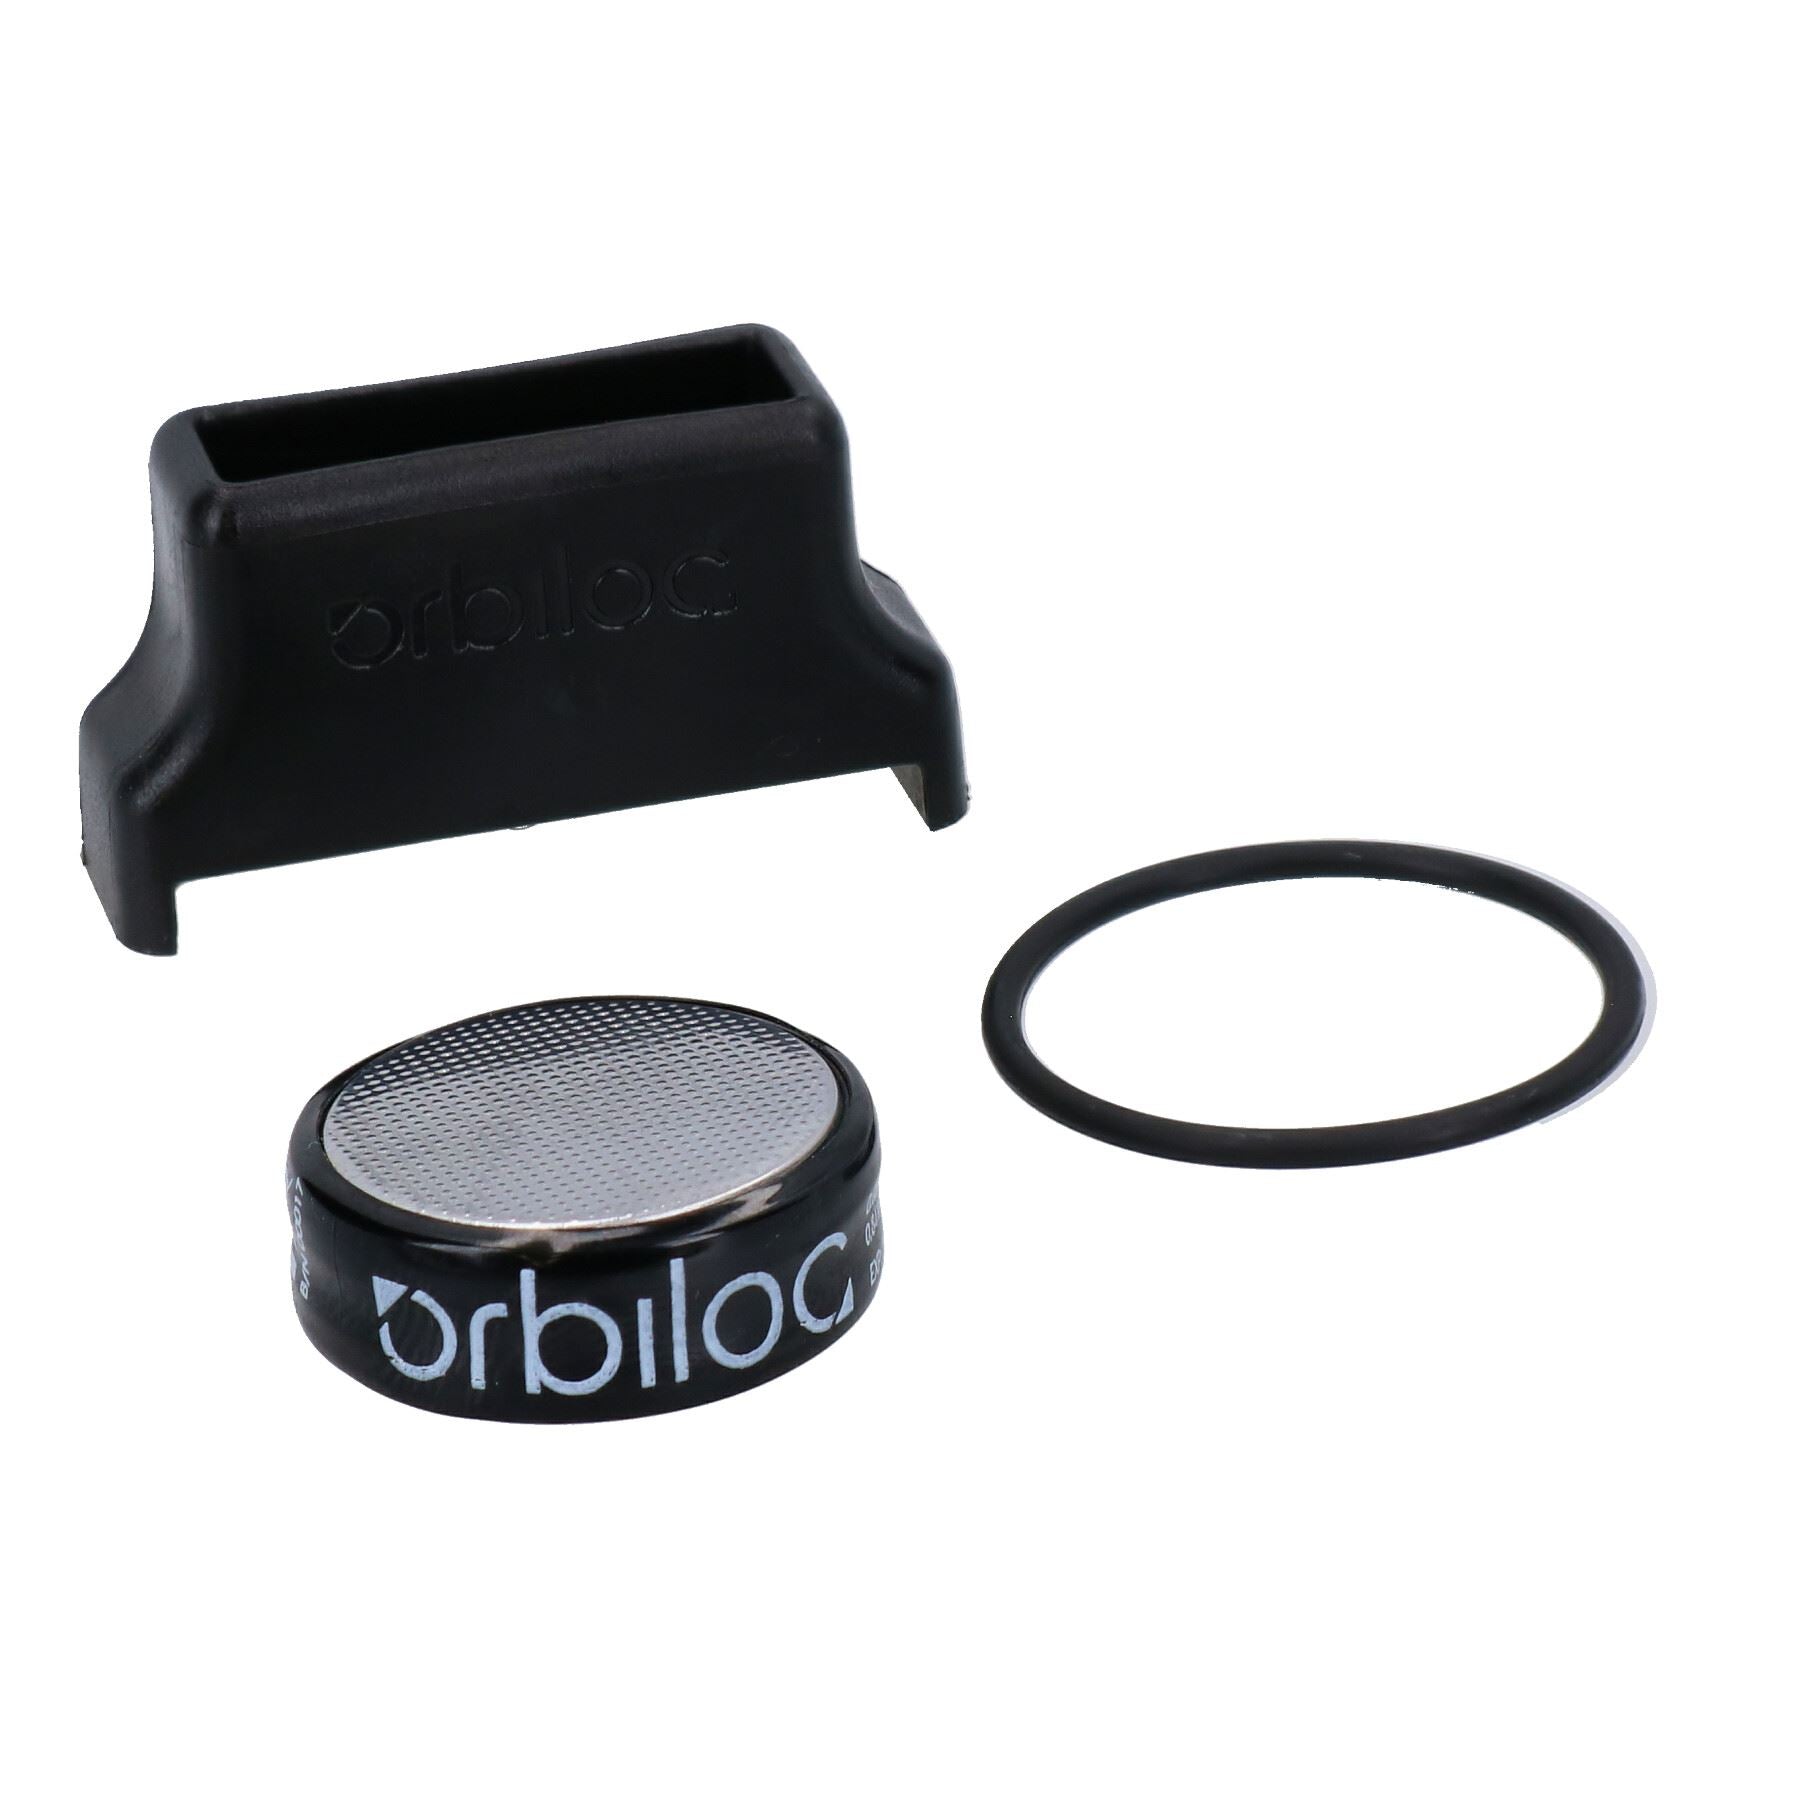 Orbiloc Service Kit for Safety LED Light for Dogs, Replacement Batteries and O-Ring